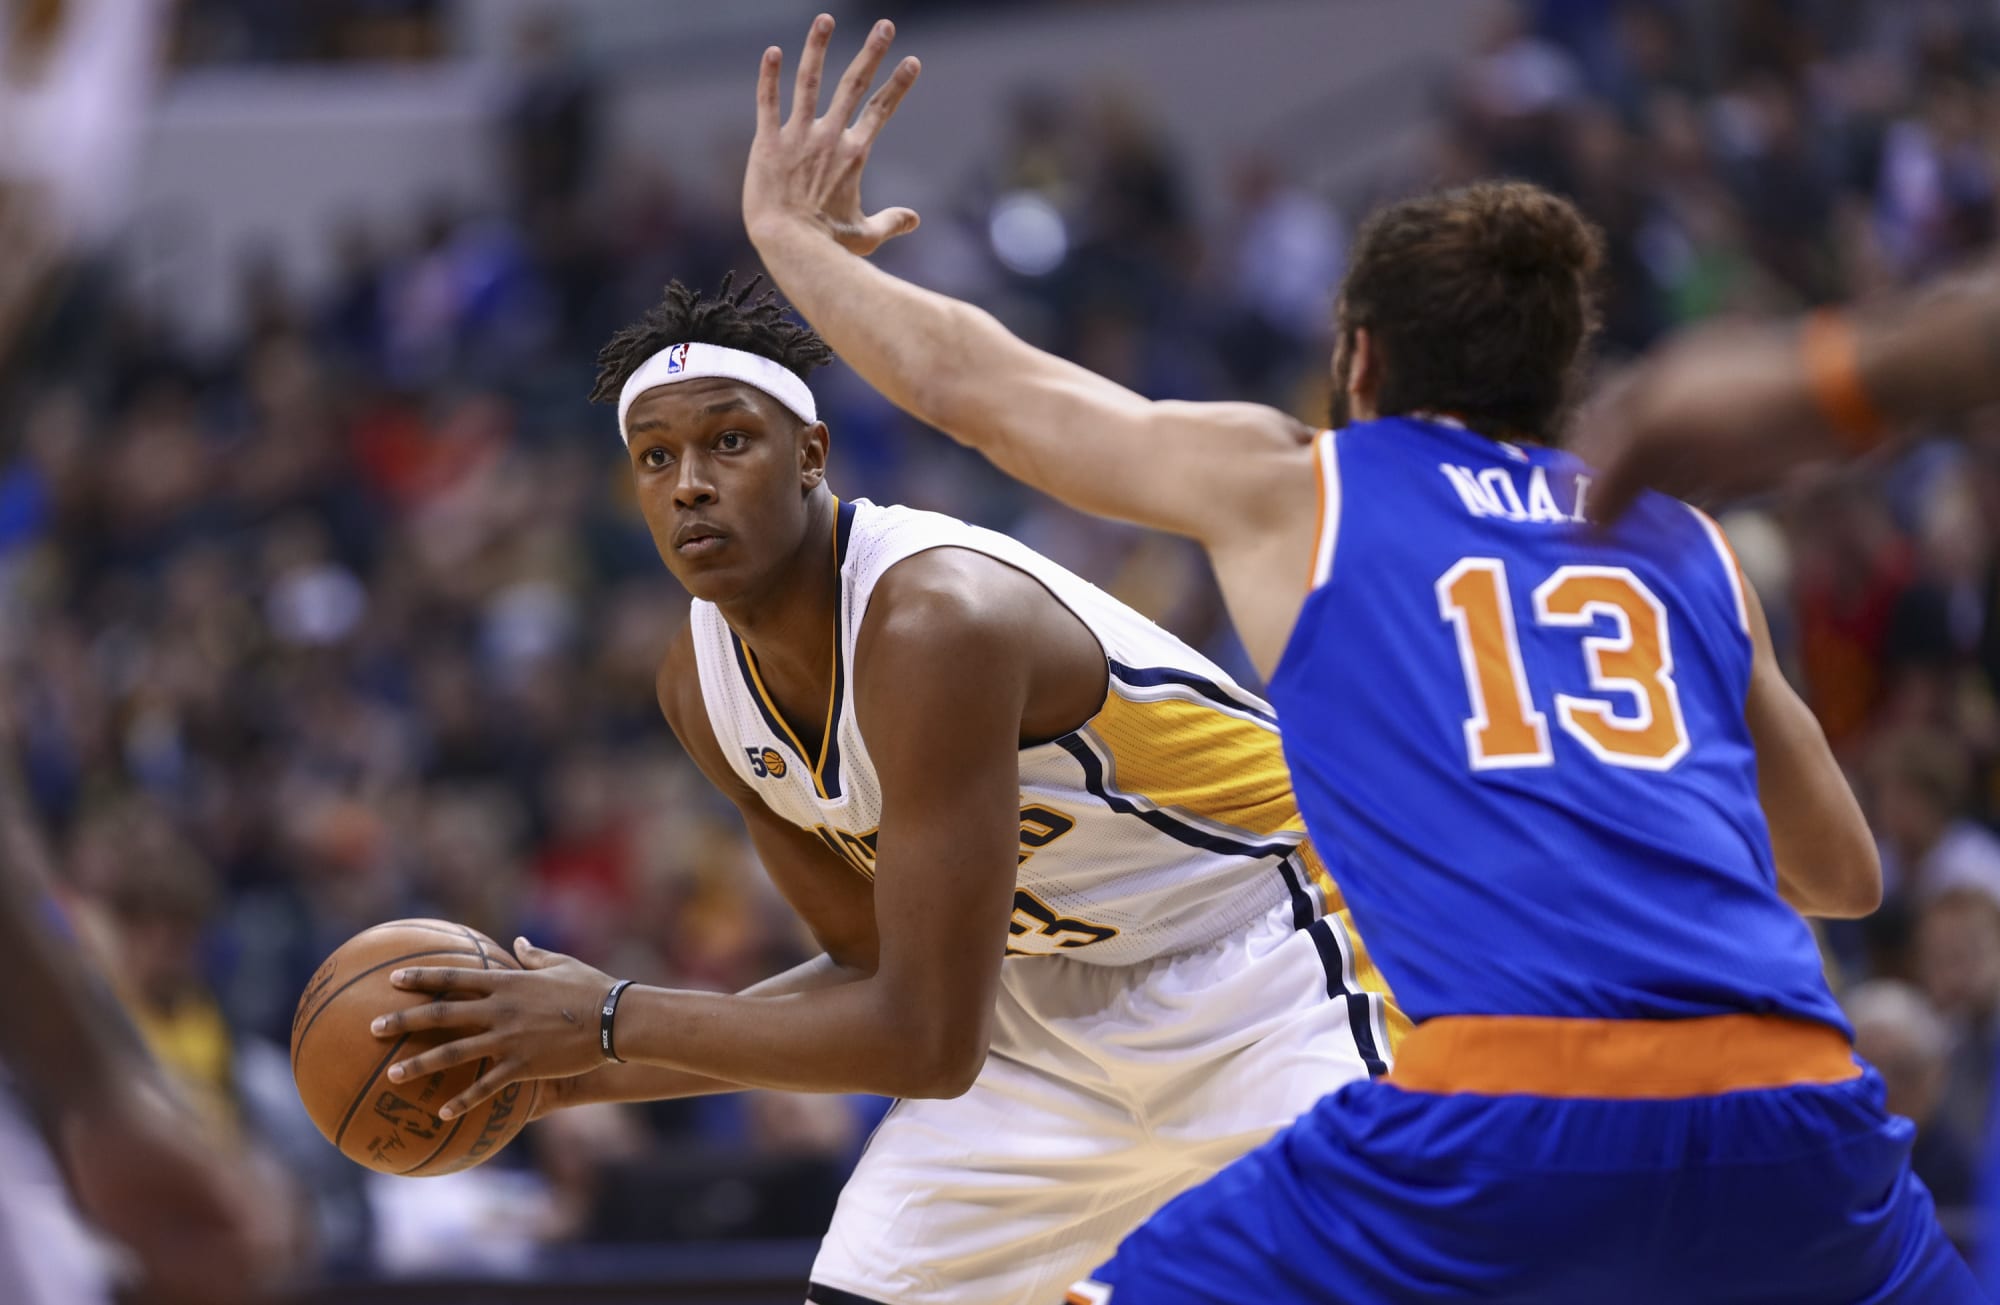 Myles Turner is 68th in The Crossover's Top 100 NBA players of 2018